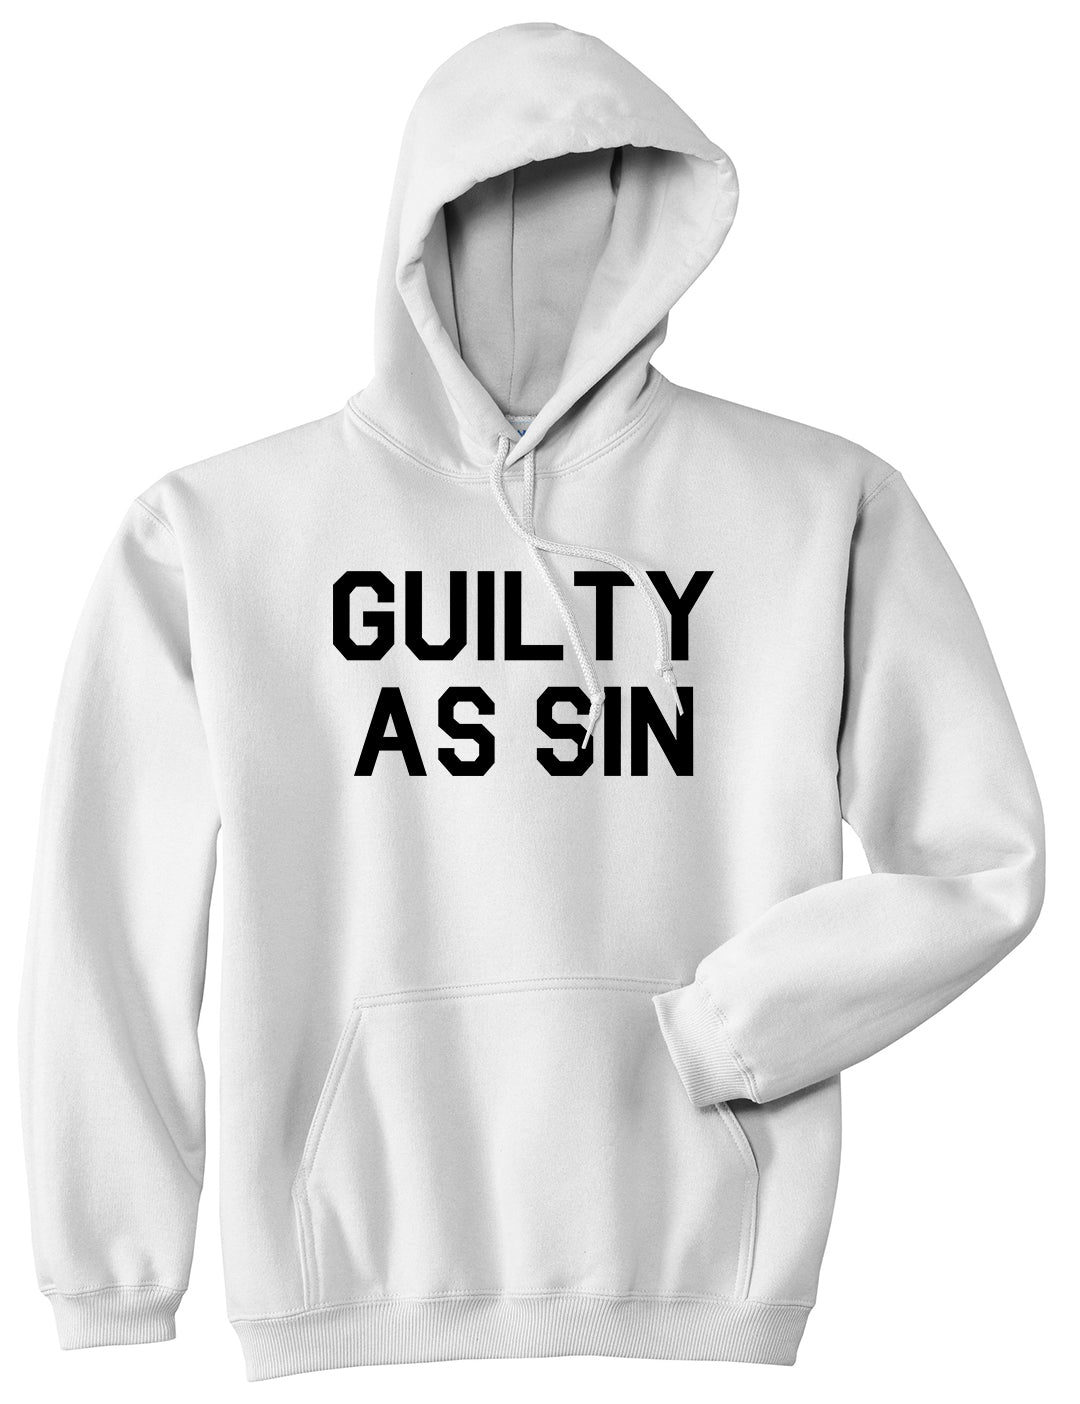 Guilty As Sin Mens Pullover Hoodie White by Kings Of NY